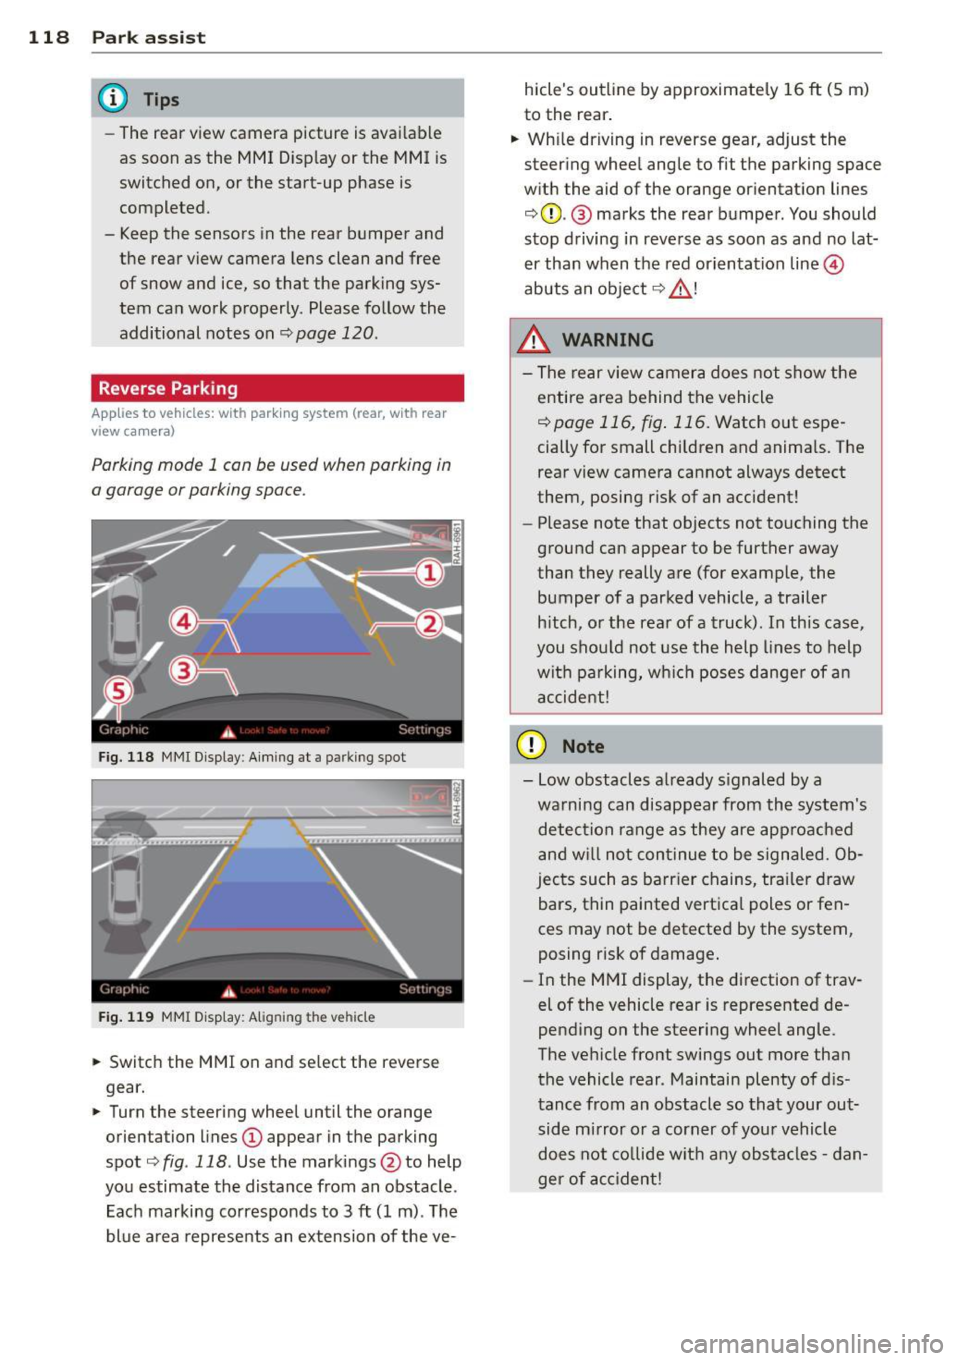 AUDI A4 SEDAN 2013  Owners Manual 118  Park ass is t 
@ Tips 
- The  rear  view  camera  picture  is avai lable 
as  soon  as  the  MMI D isplay  or  the  MMI  is 
switched  on,  or  the  start-up  phase  is 
completed. 
- Keep the  s